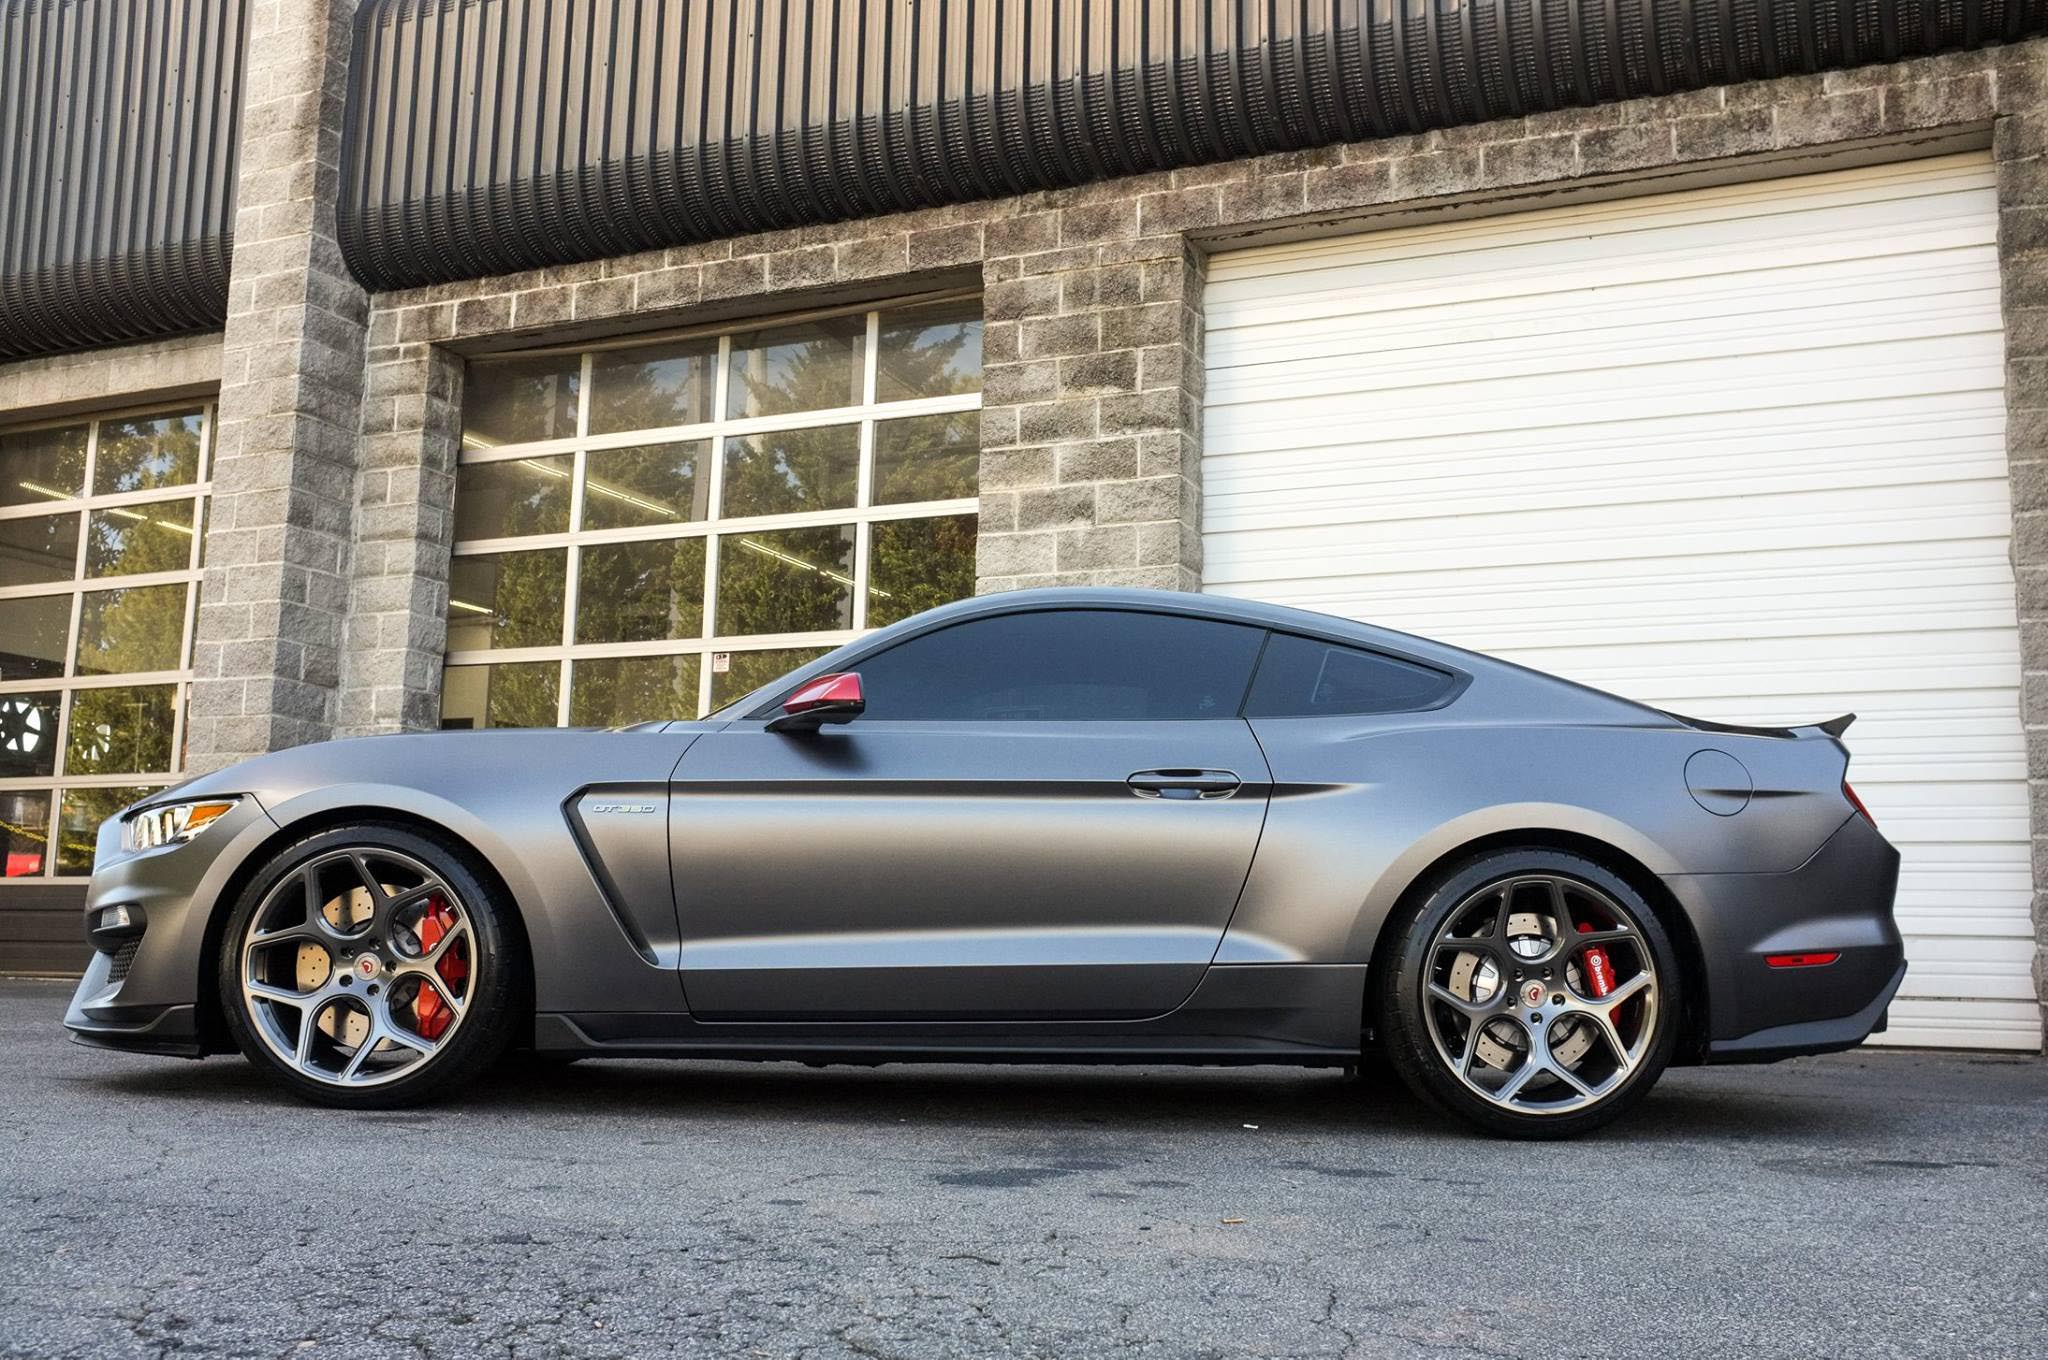 shelby-mustang-gt350-with-vossen-cg205-wheels-3.jpg